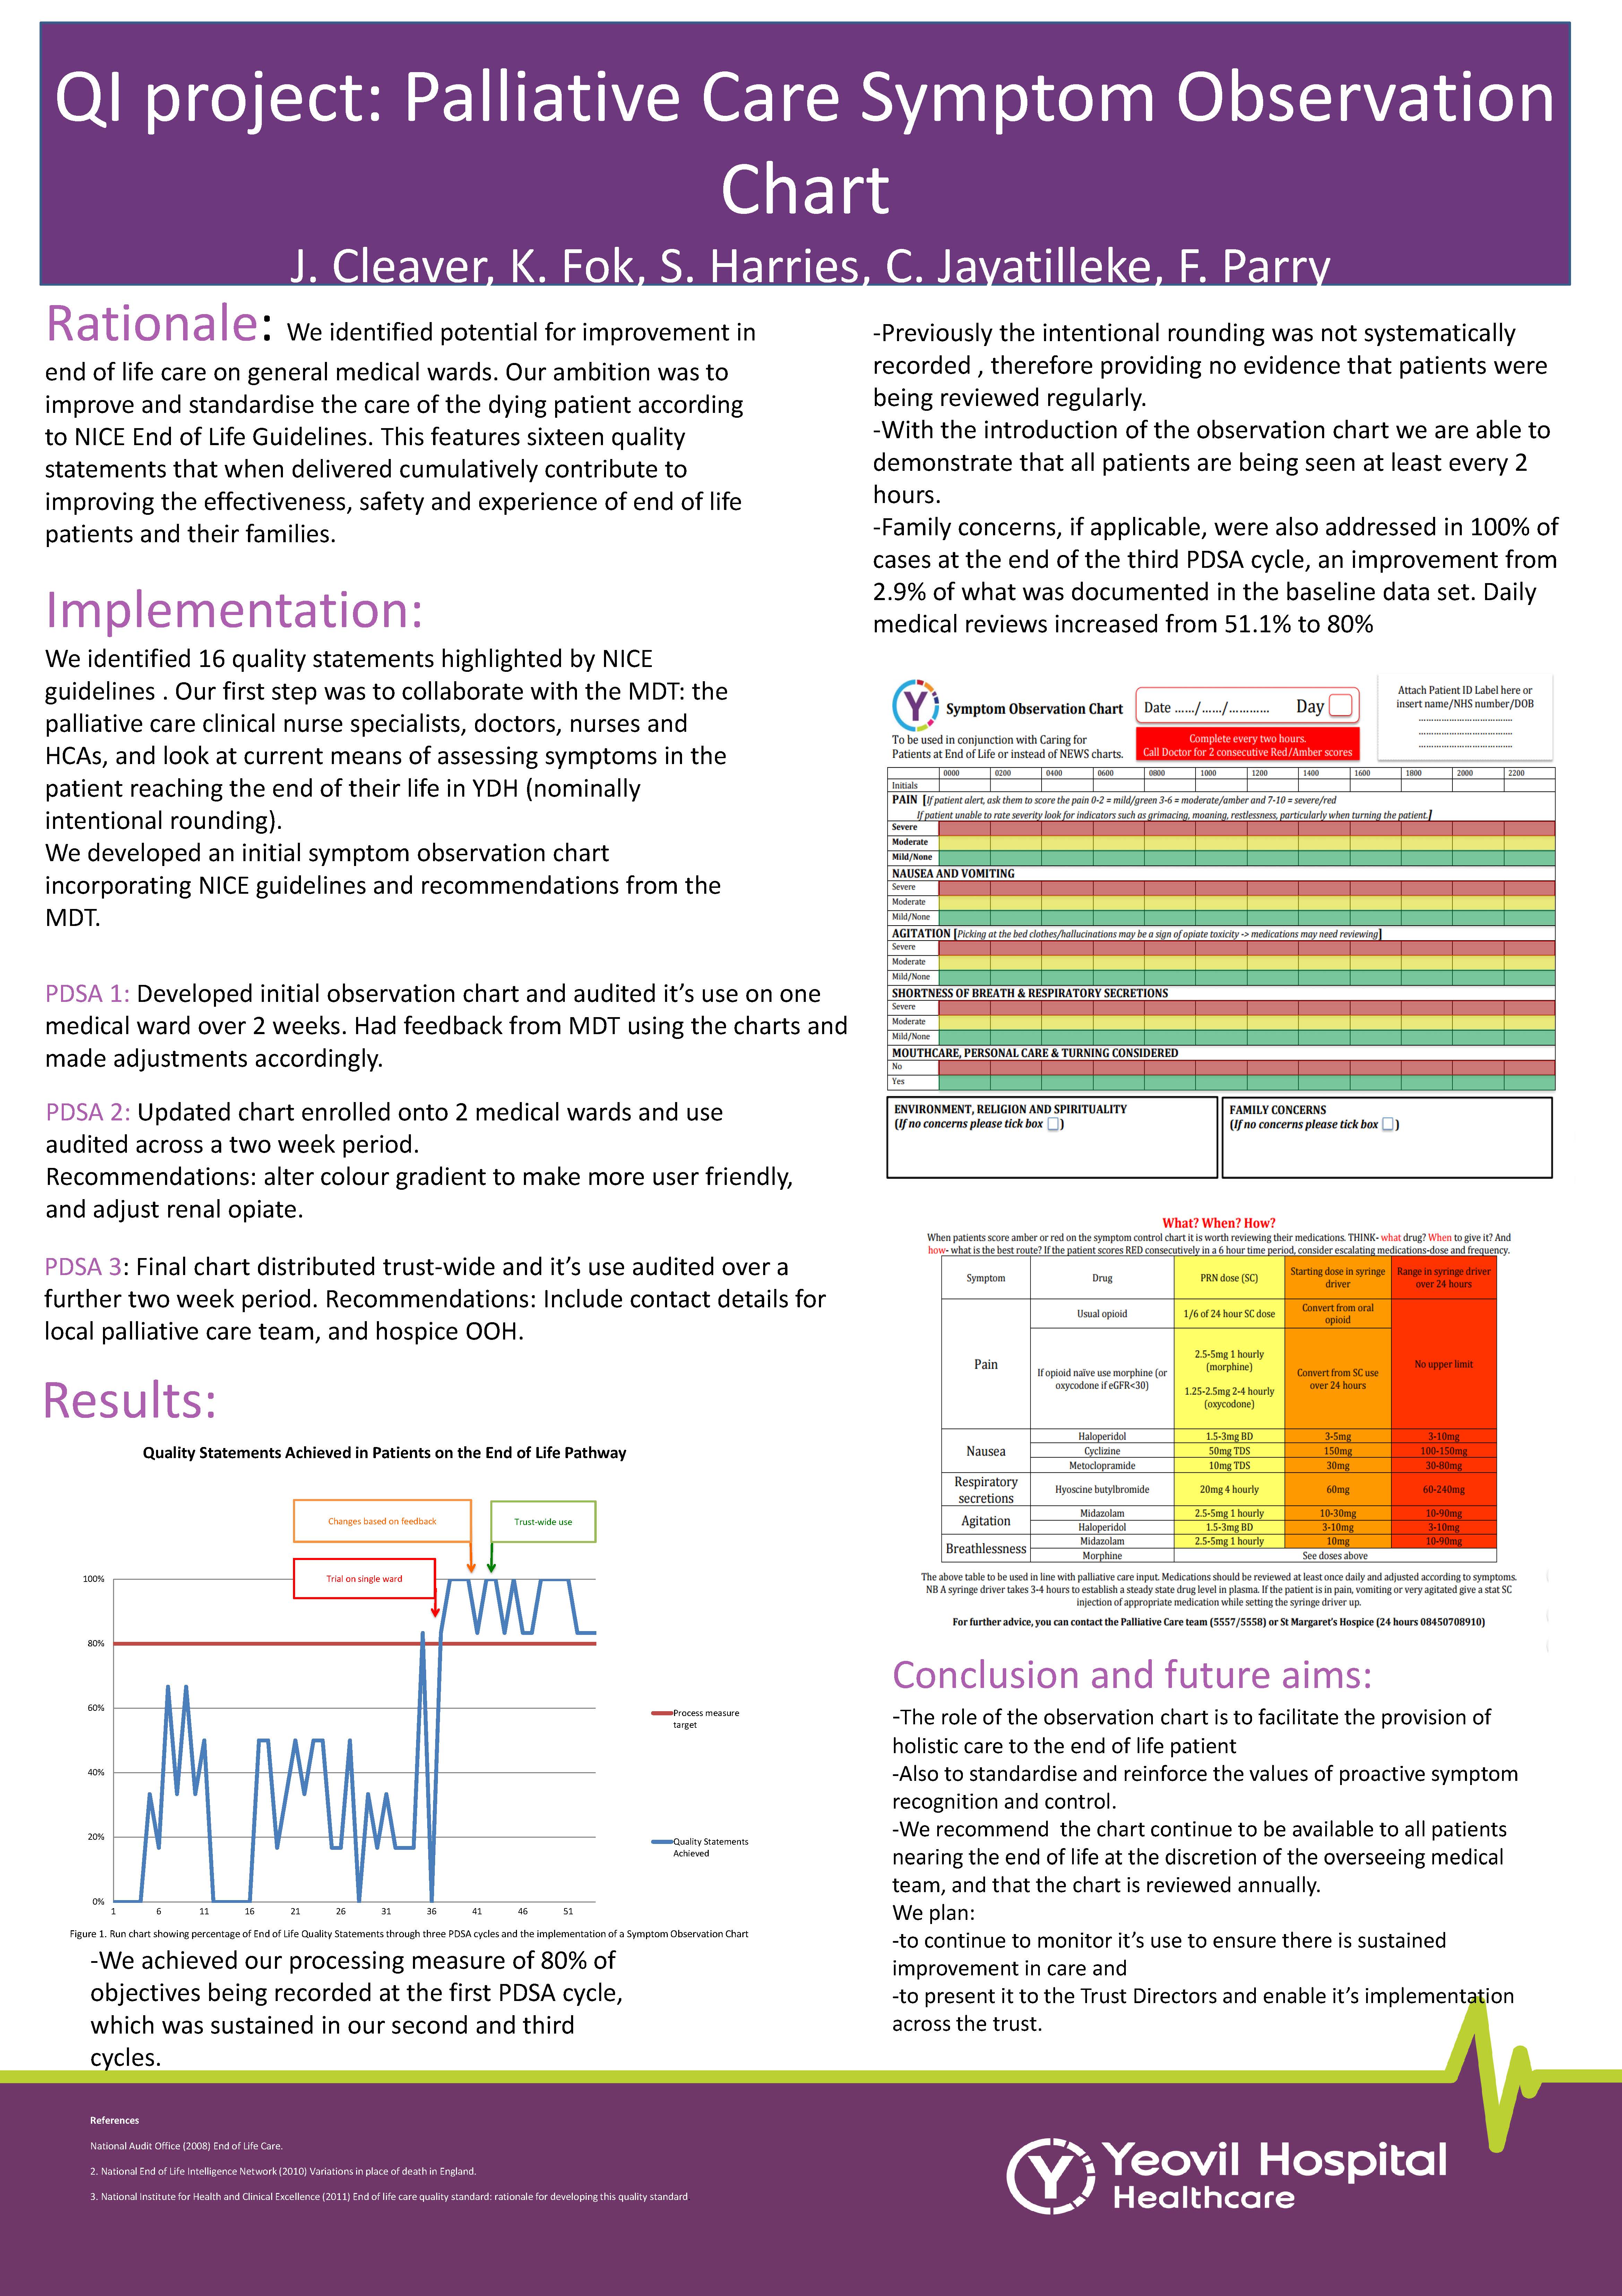 Palliative Care Symptom Observation Chart - Quality Improvement Project at Yeovil Hospital featured image